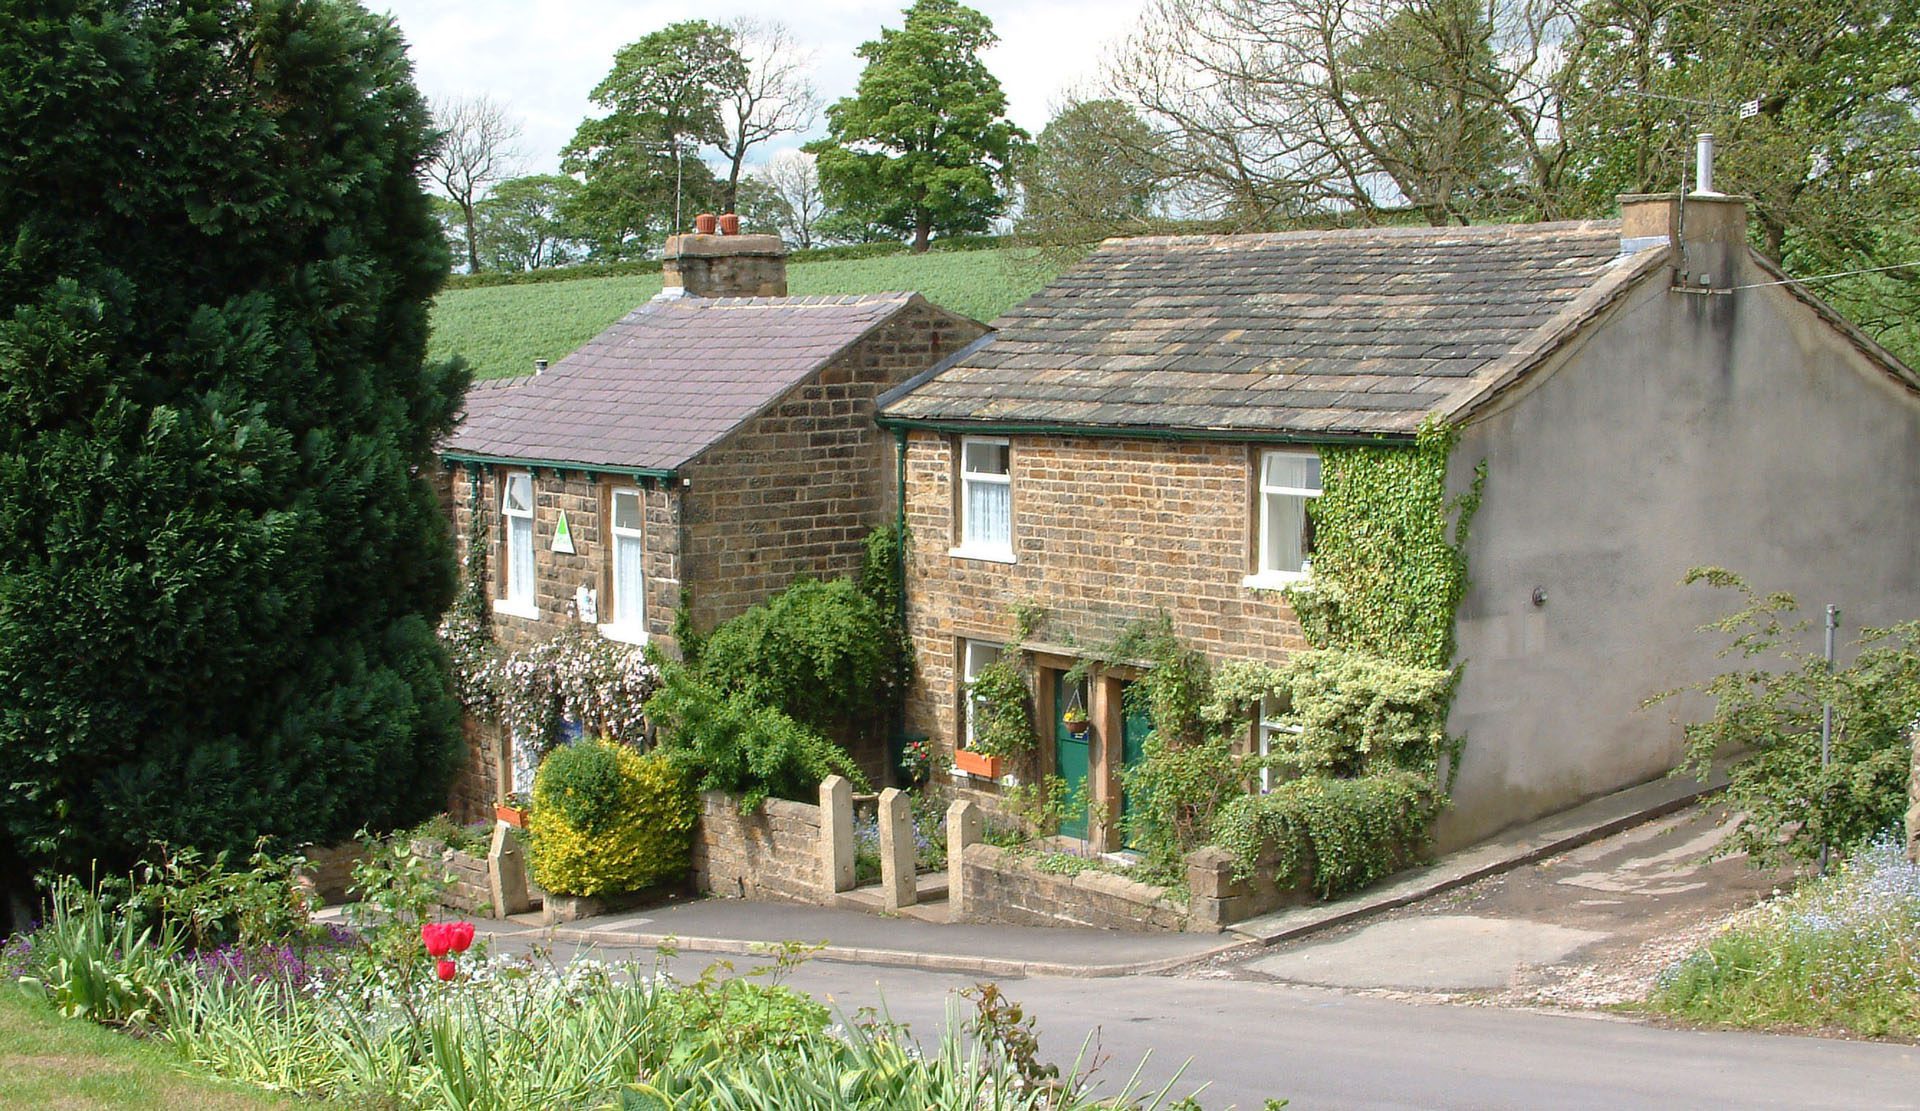 Earby hostel exterior. it is a sweet little cottage with vines growing up the walls 